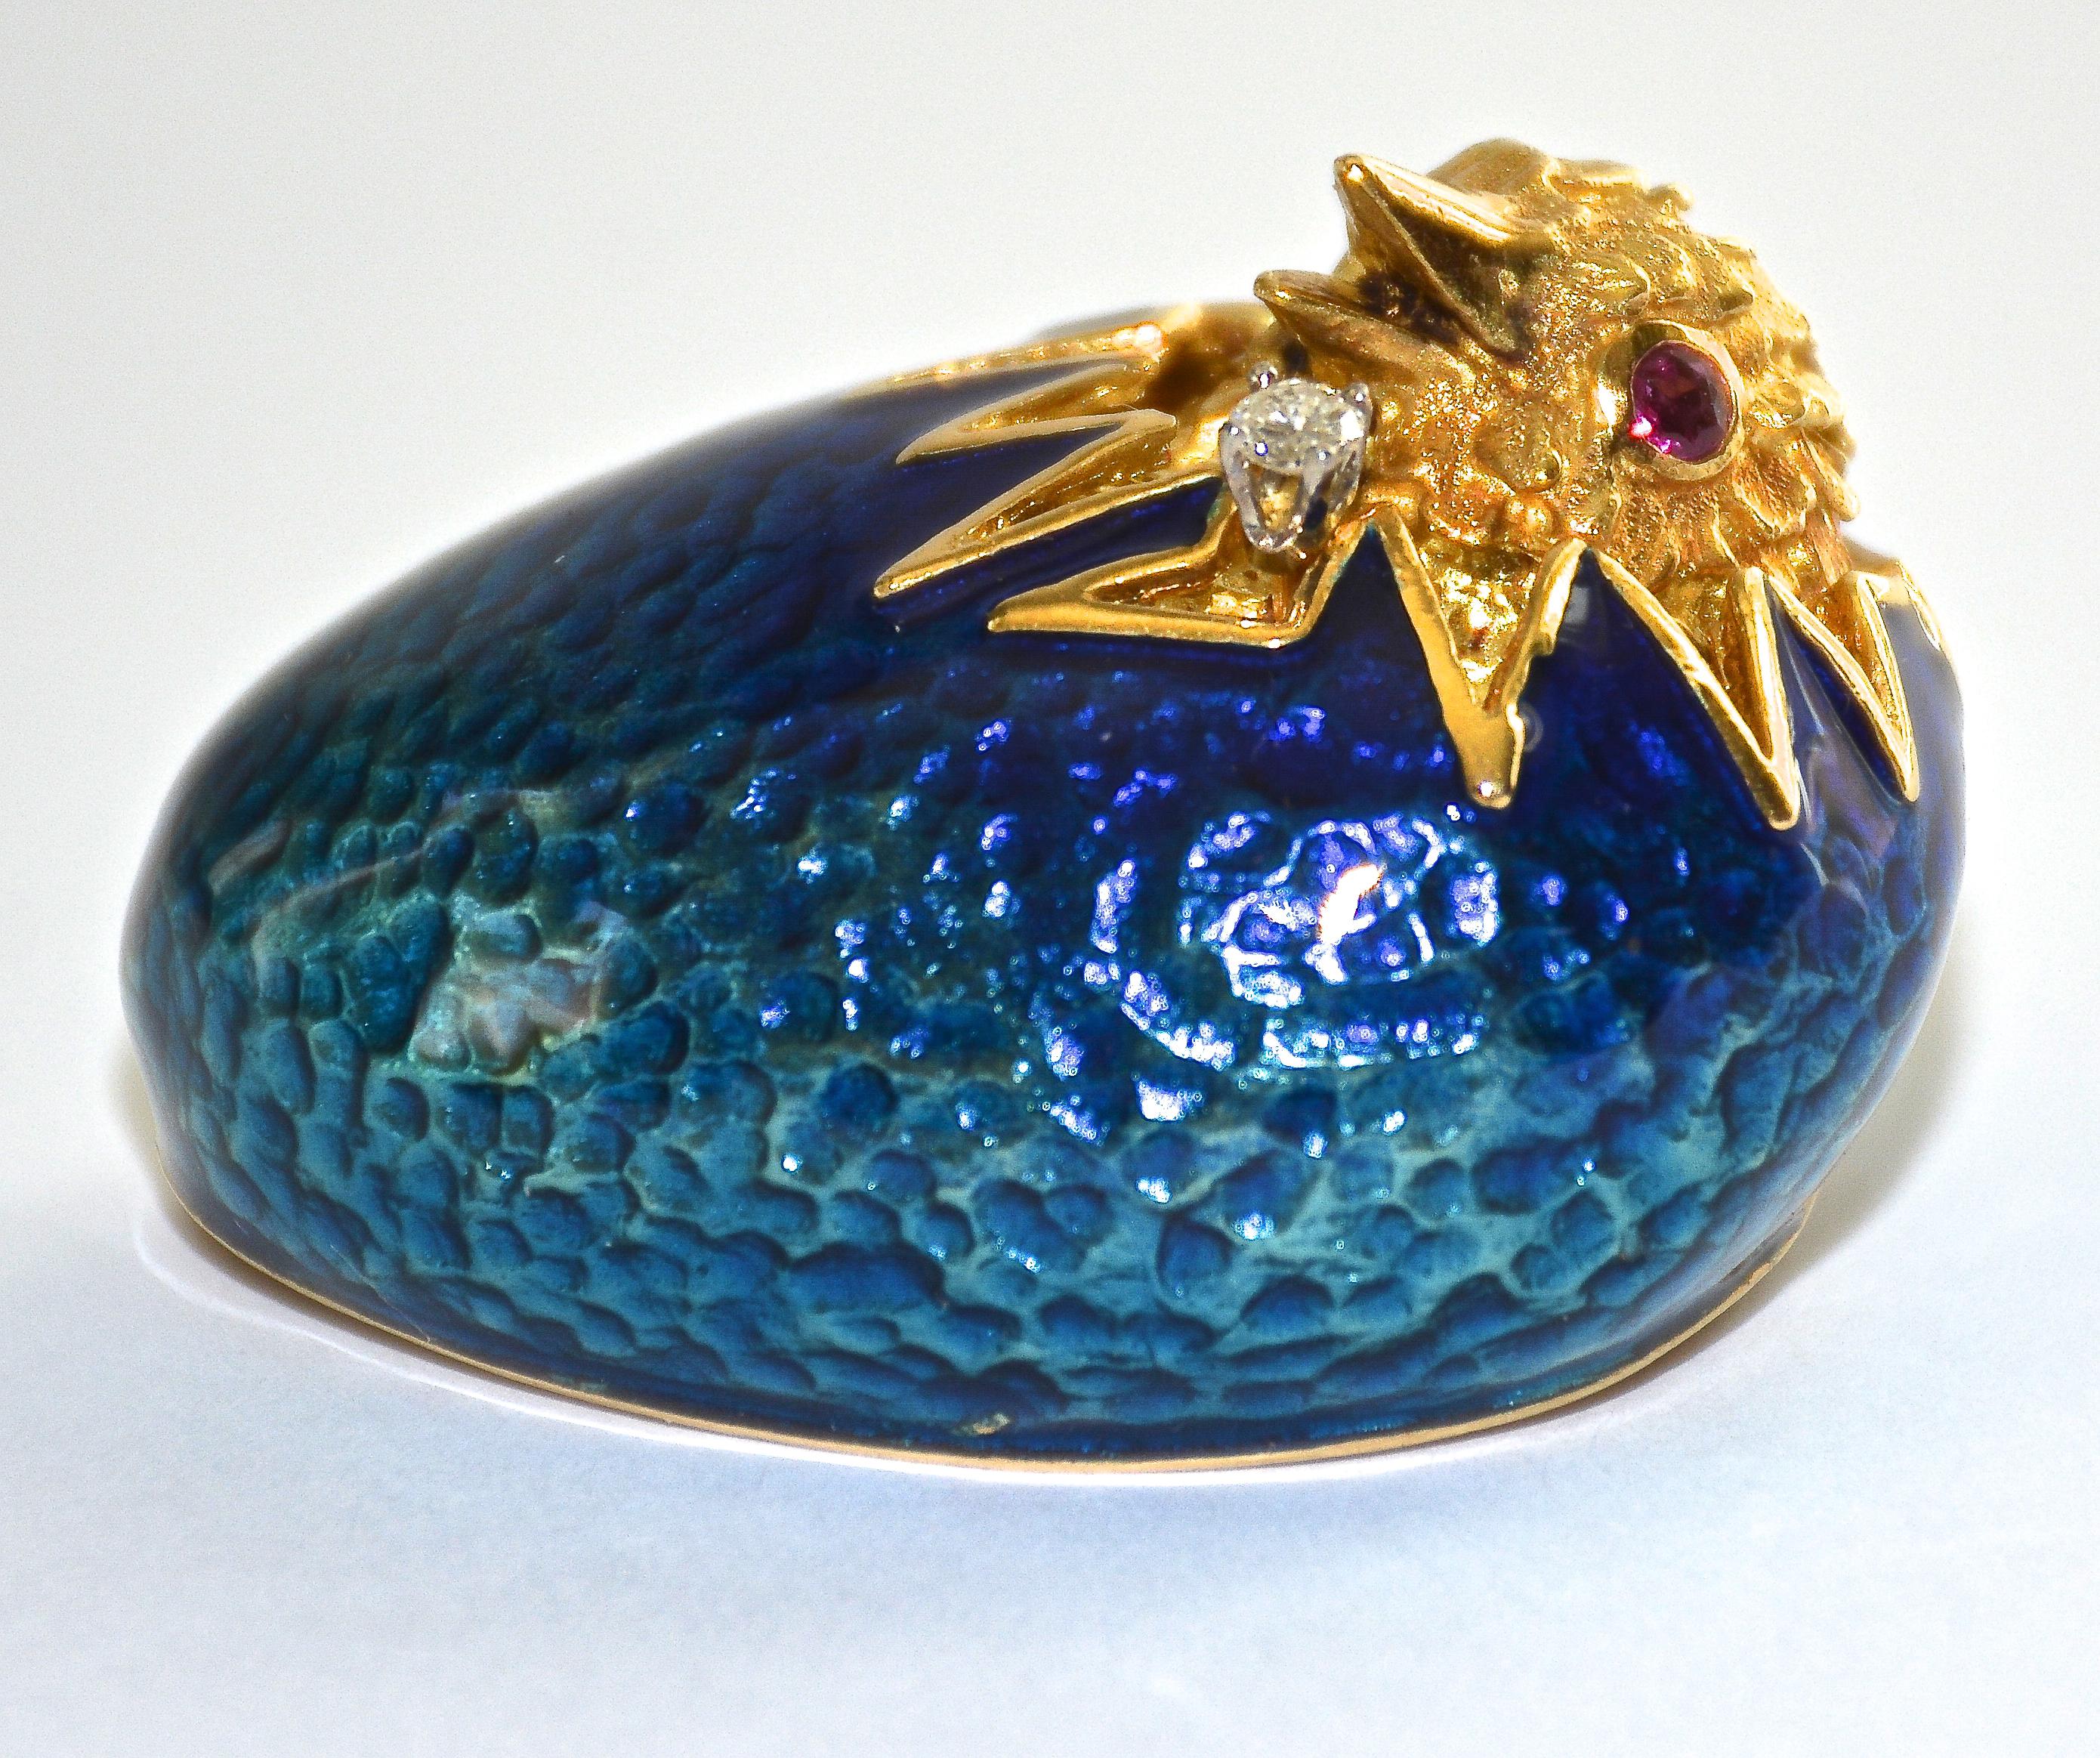 The wonderful brooch is designed as a blue enameled egg featuring a hatching chick.

Set with one full brilliant cut diamond weighing approximately .05 carat, approximately H-I color and approximately VS clarity. Further accented with two round cut